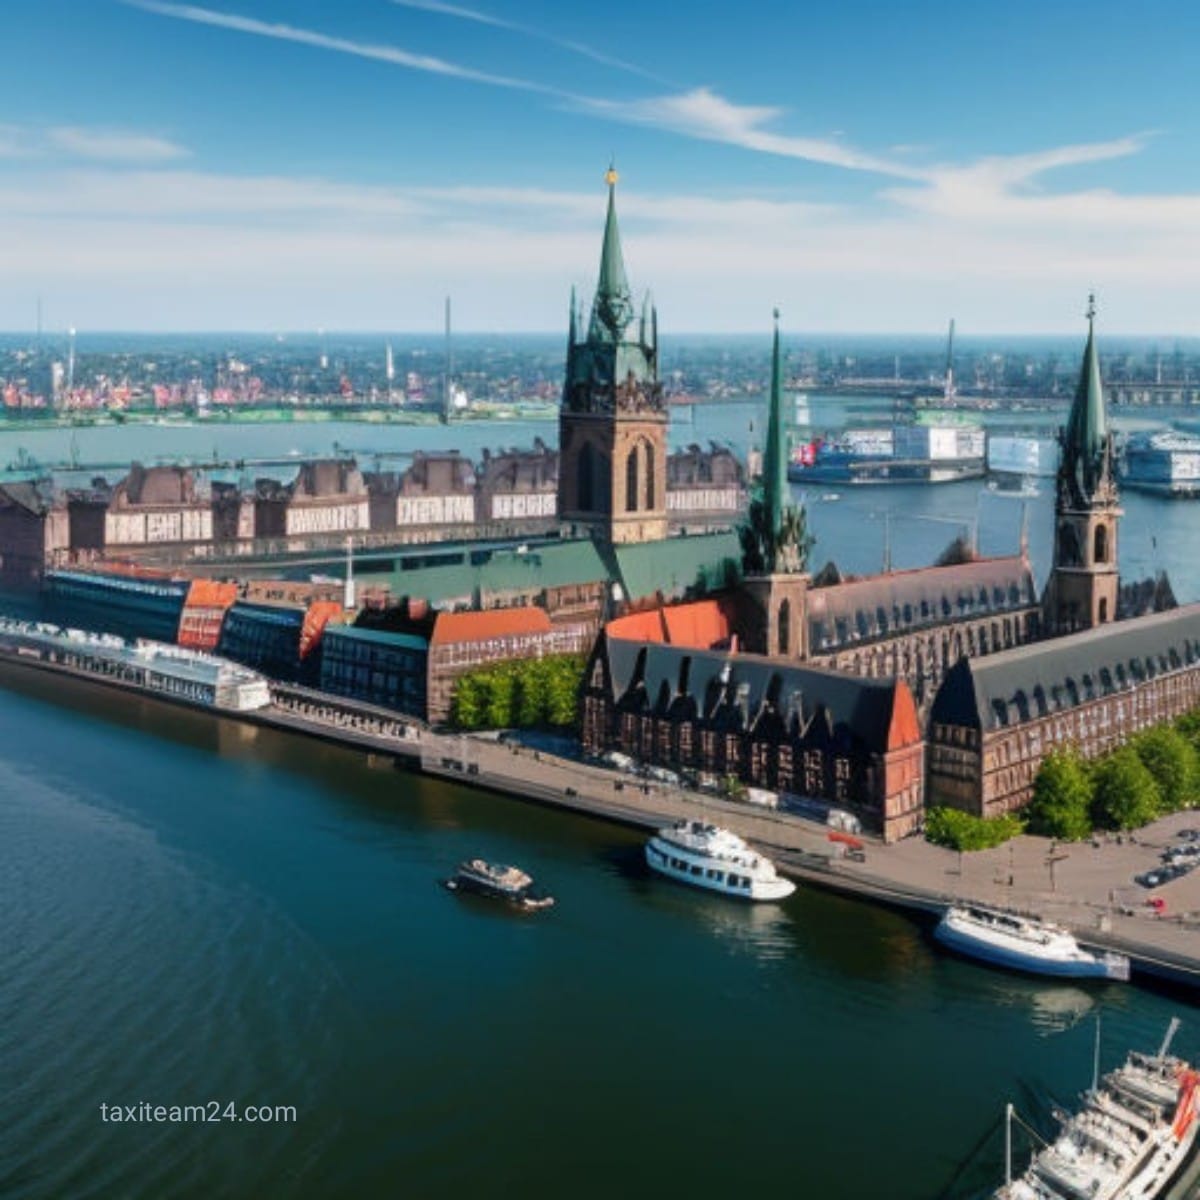 Taxi-airport-hamburg-transfers-place-of-interest